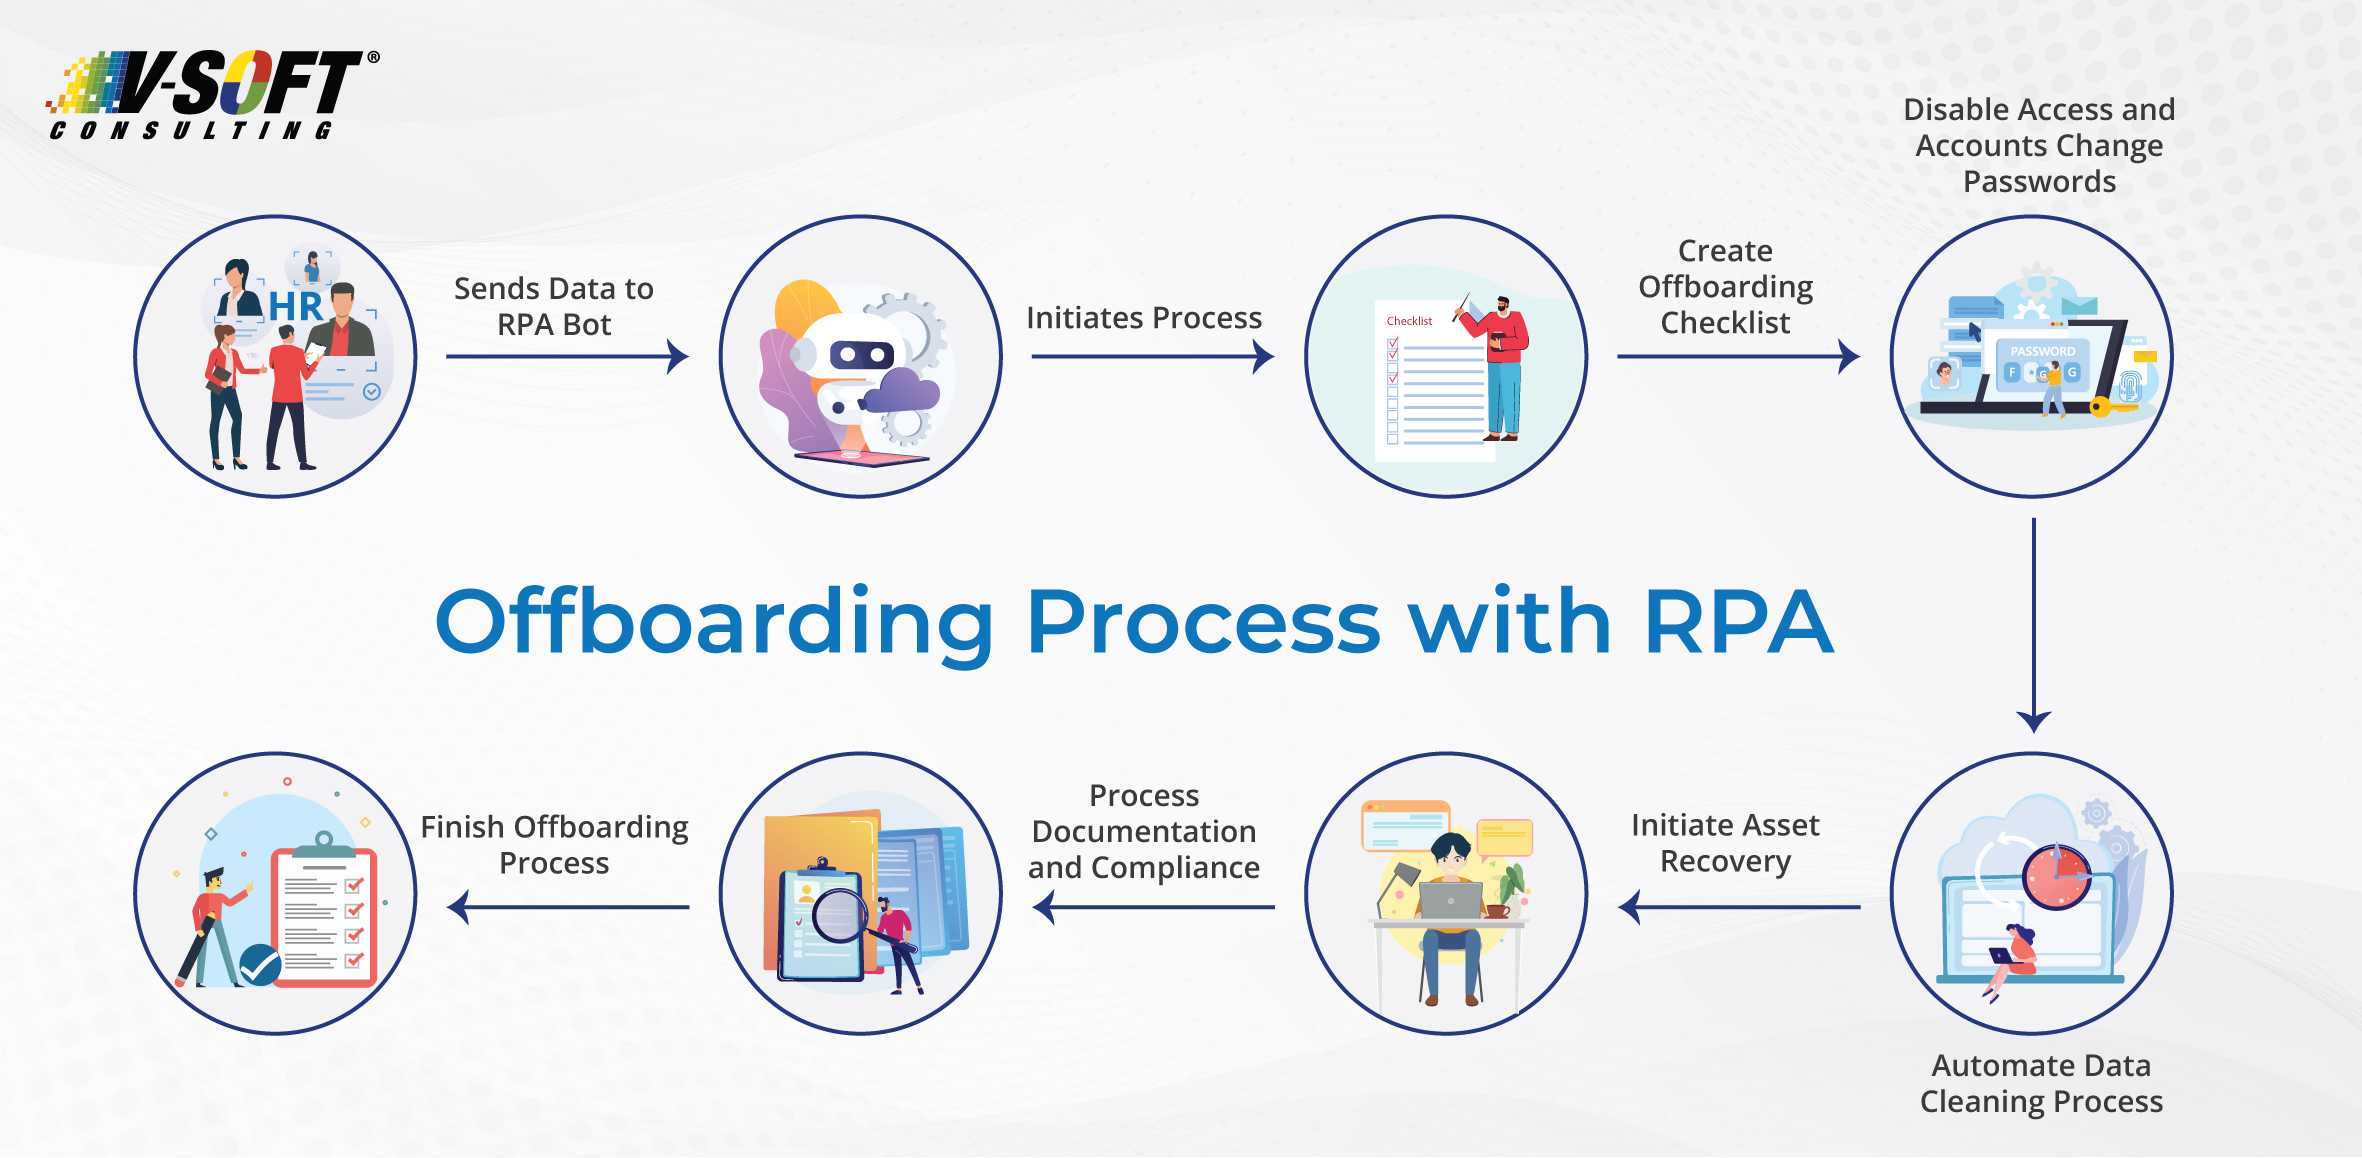 Offboarding with RPA